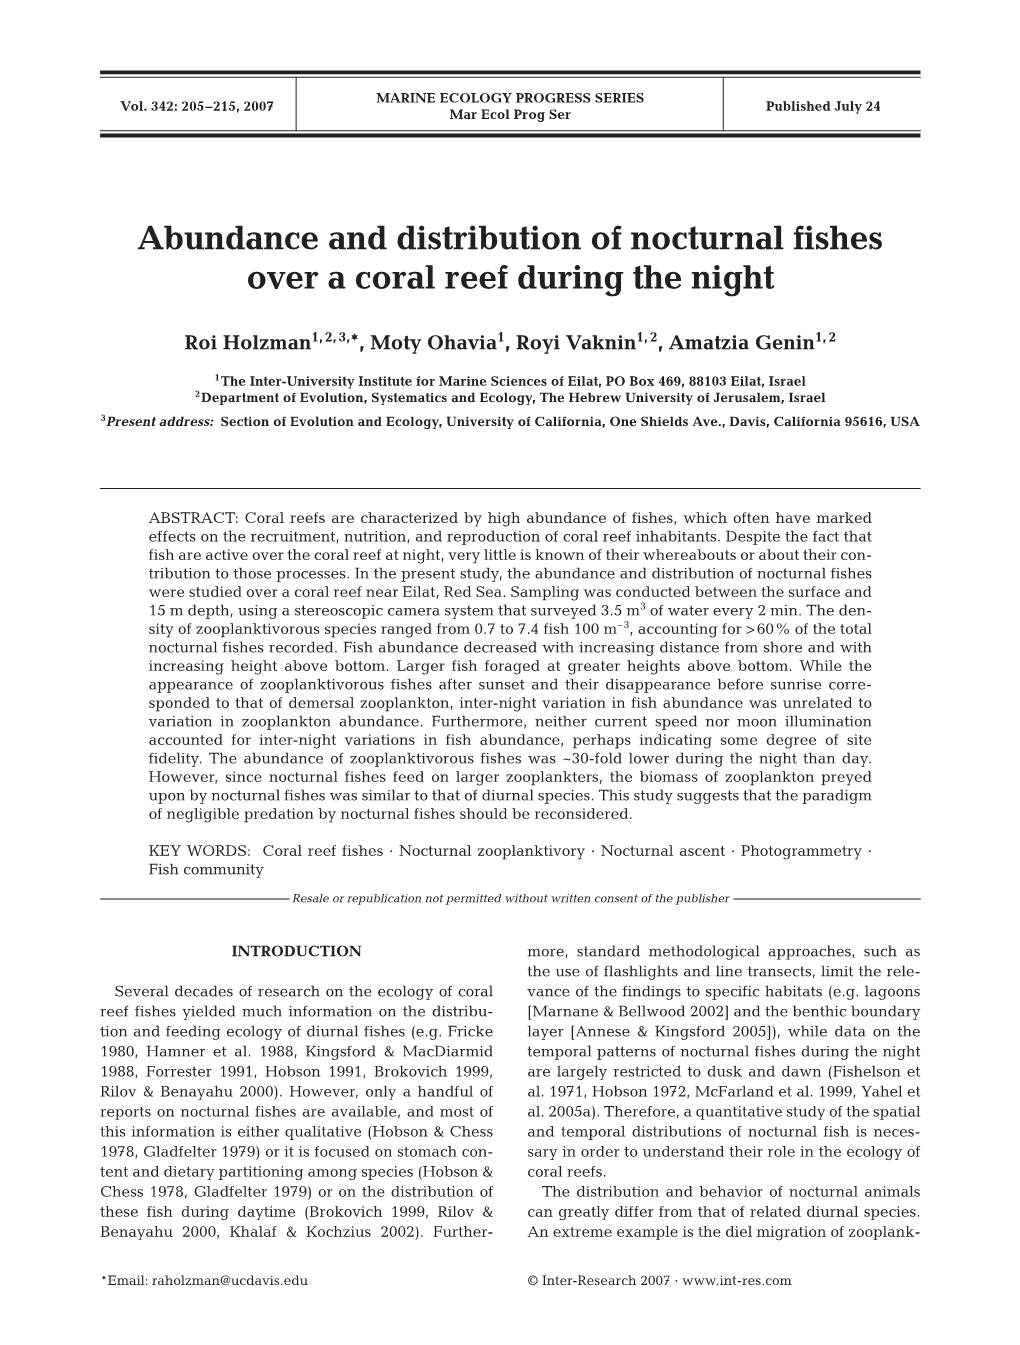 Abundance and Distribution of Nocturnal Fishes Over a Coral Reef During the Night